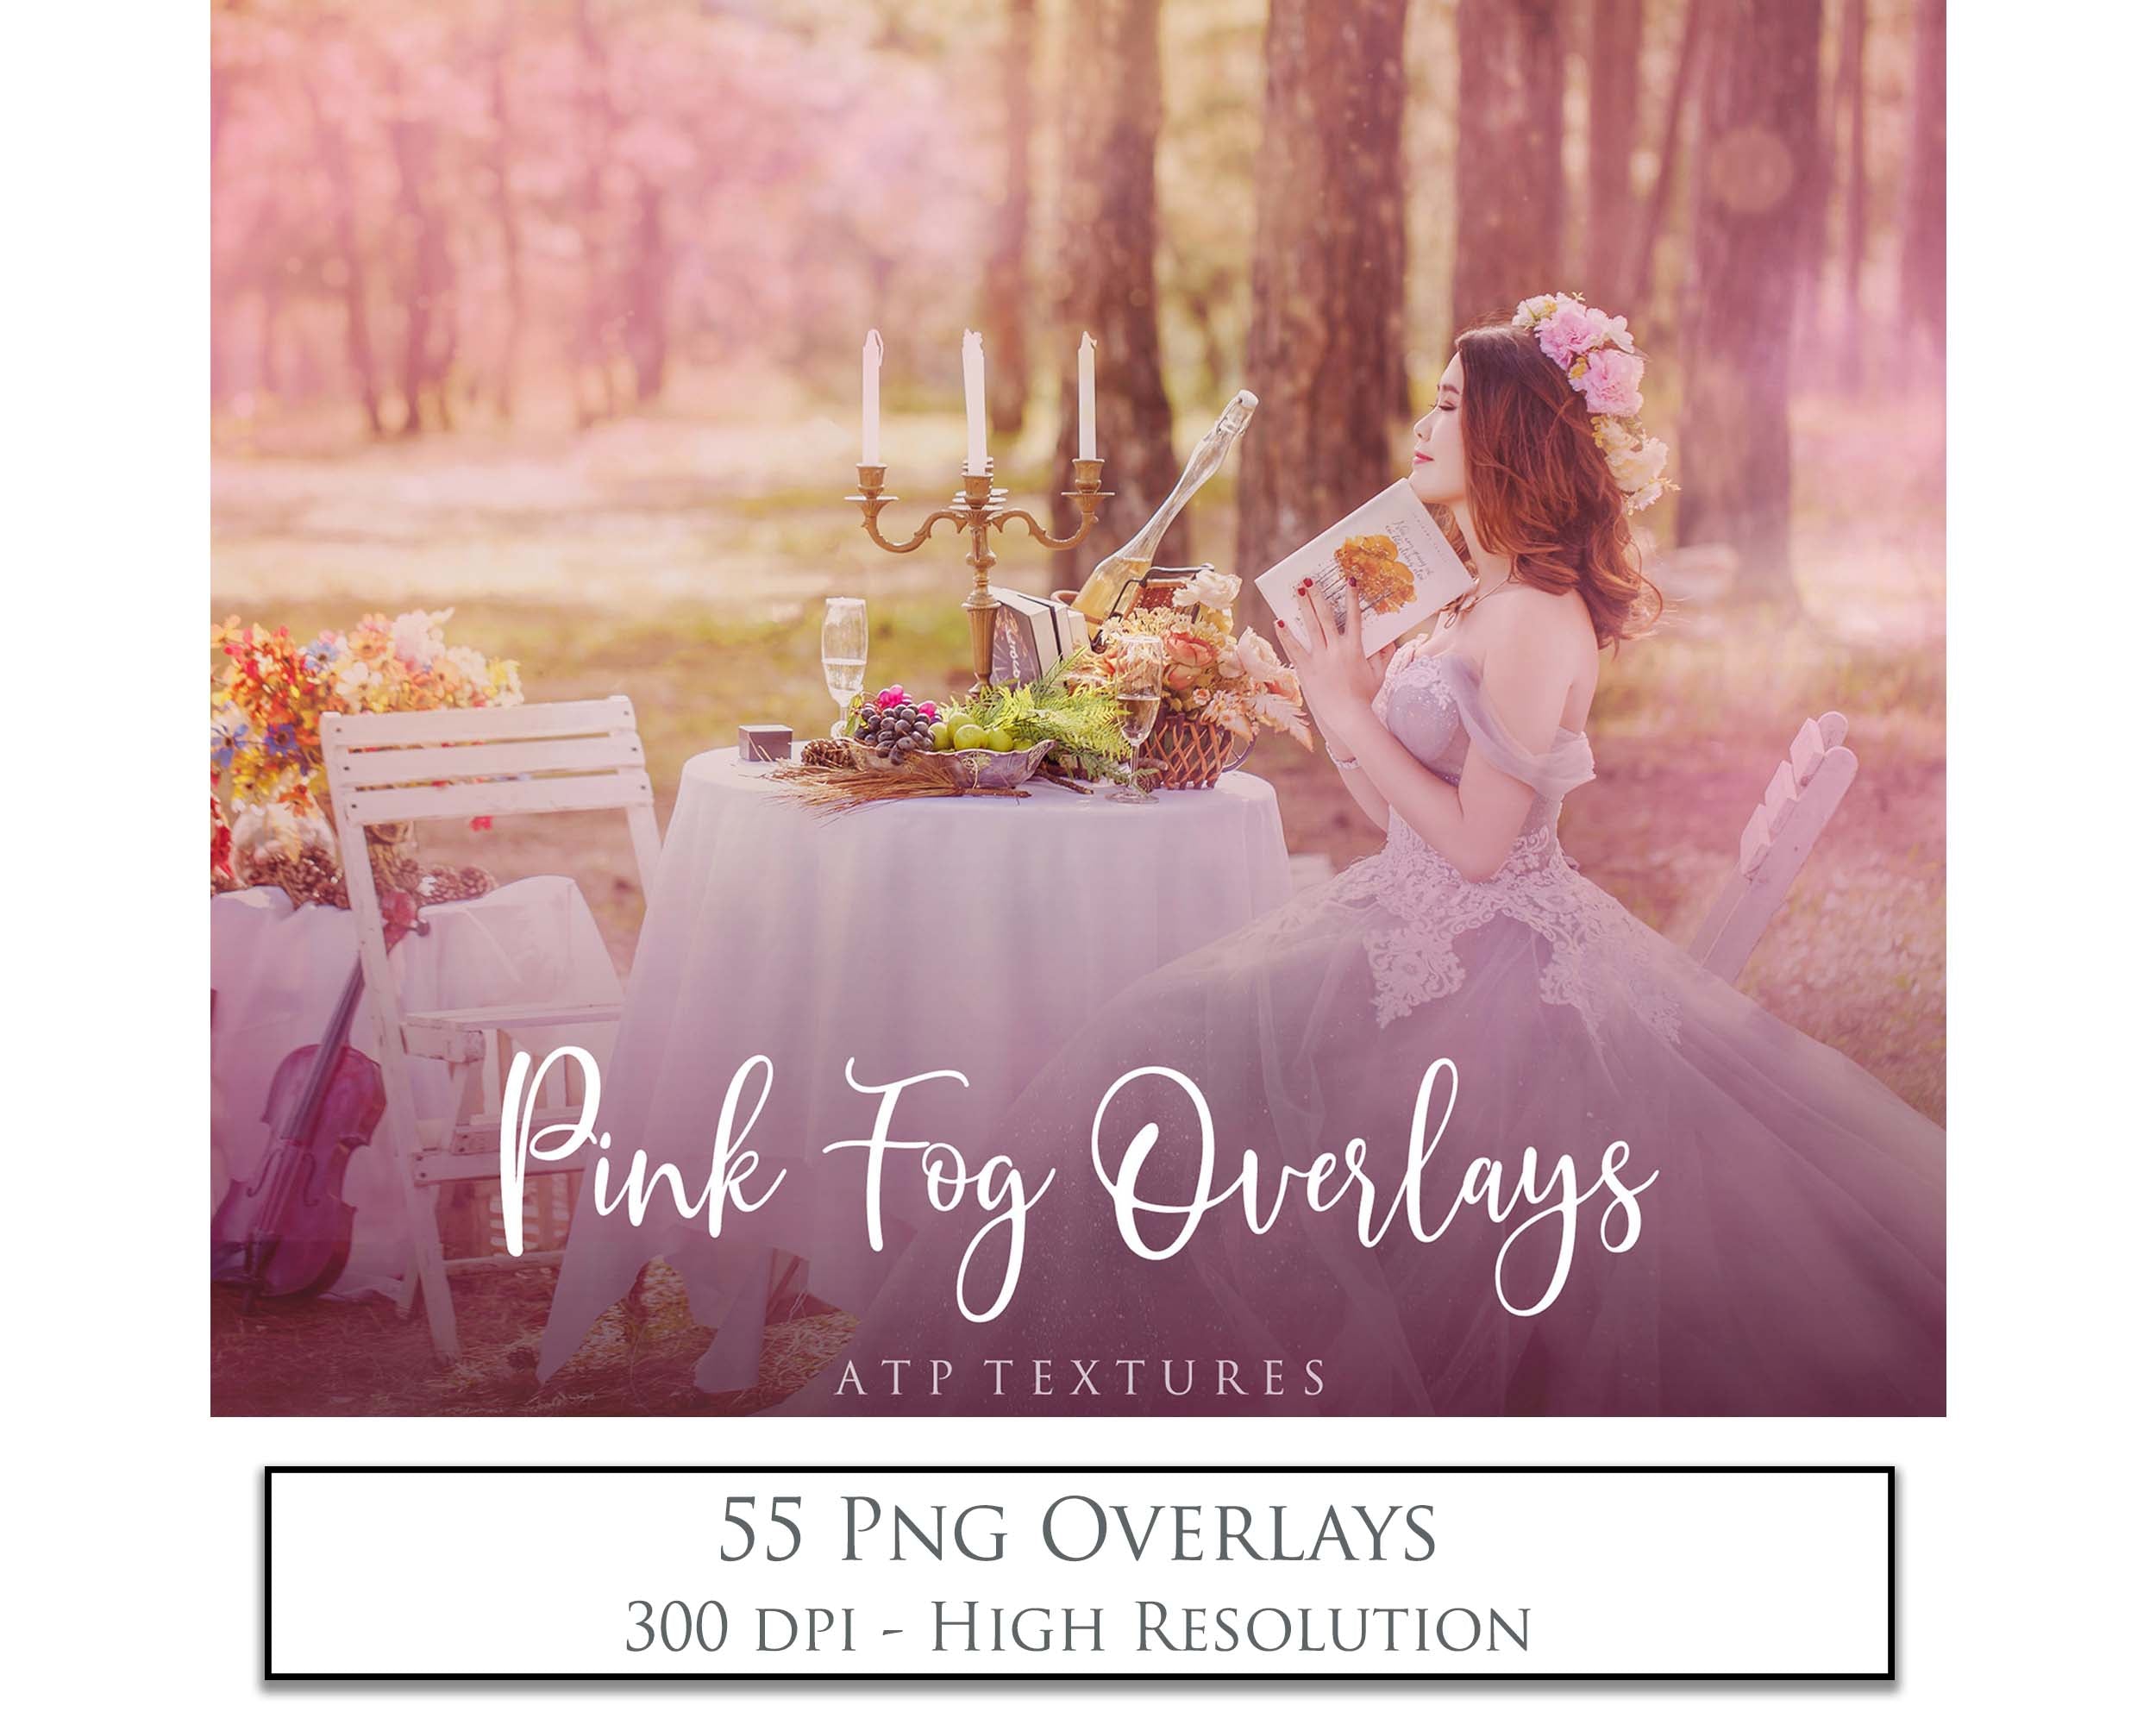 Pink Fog Overlays. Fine Art High Resolution Overlays for Photographers, Digital Art and Scrapbooking. Photoshop Photography. Fine art realistic. Printable wall art decor. In high resolution, perfect for your next edit or project! Png graphic photography assets. Sublimation art. ATP Textures